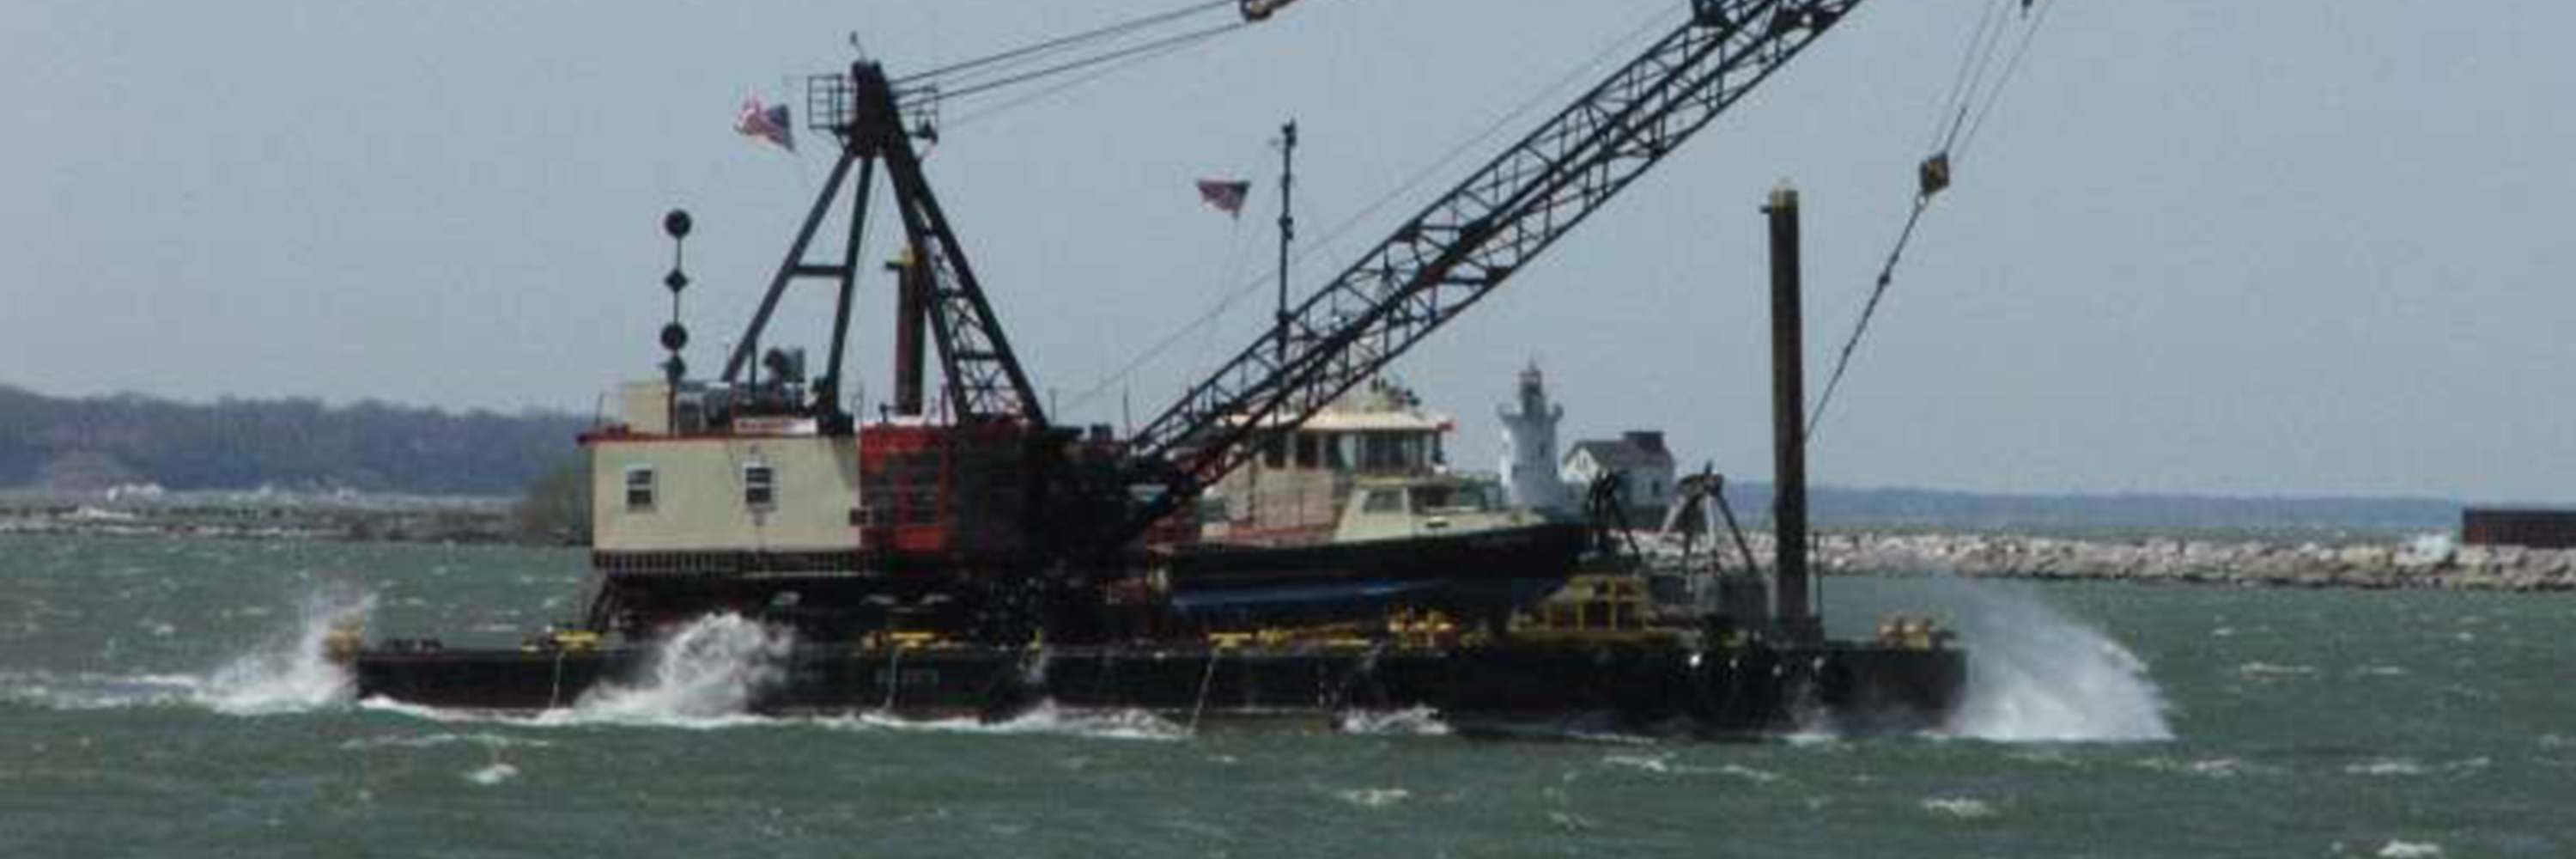 great lakes dredge and dock fuel barge